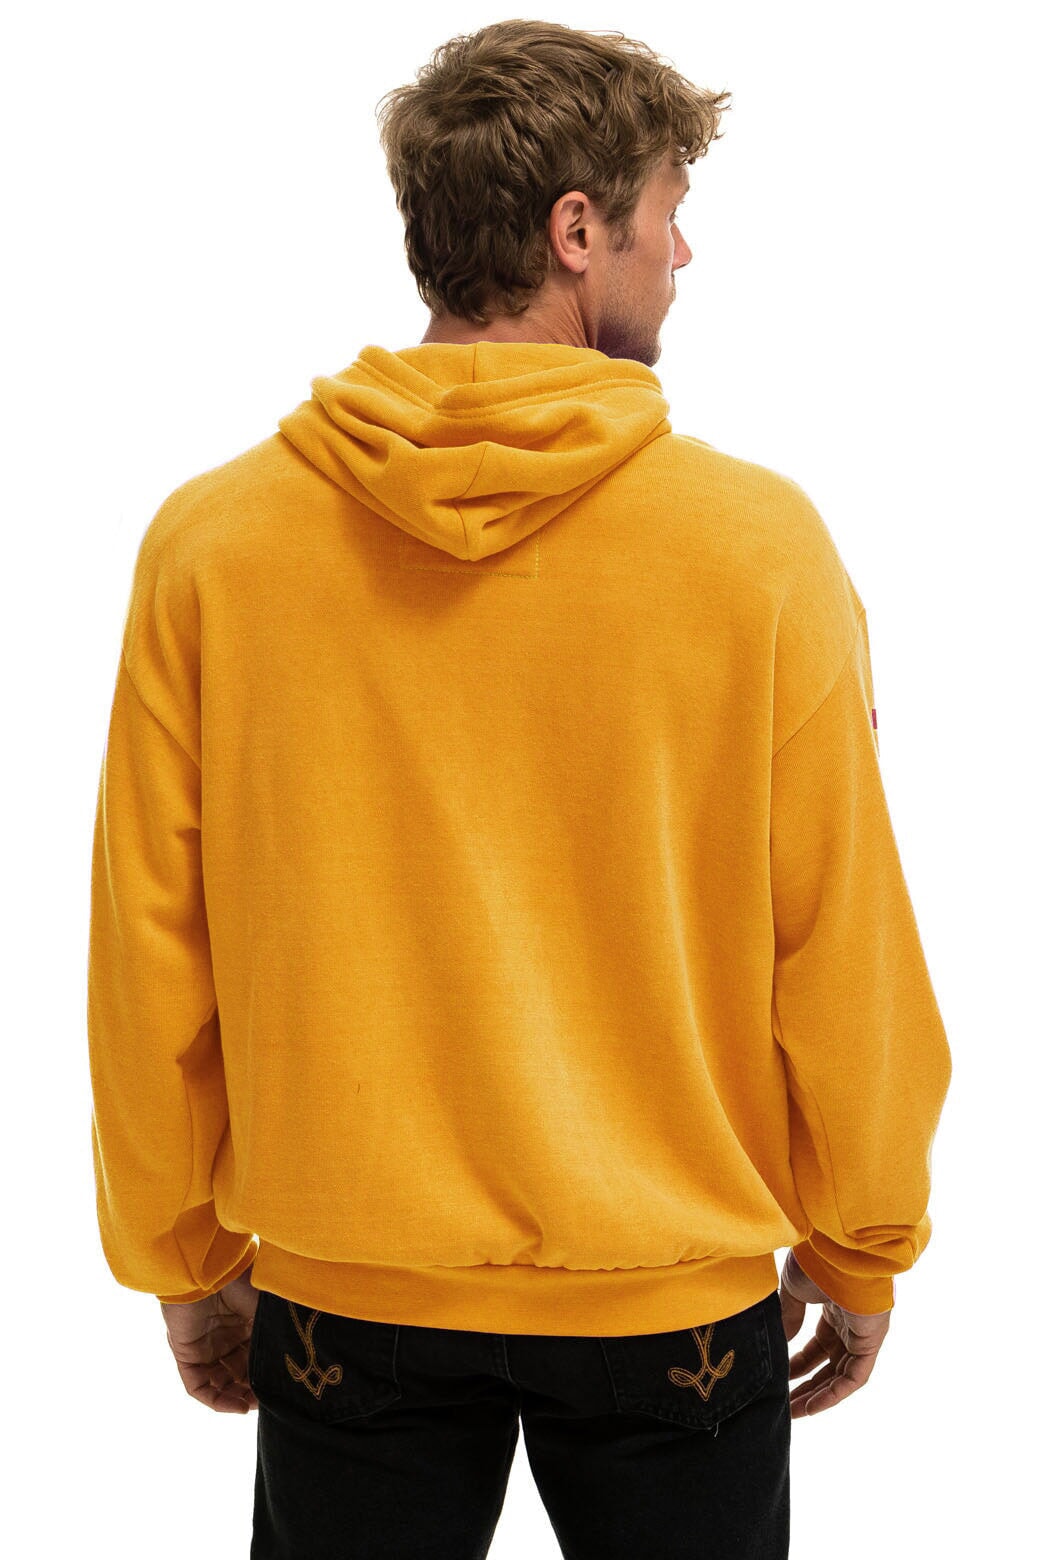 AVIATOR NATION HAIGHT ASHBURY RELAXED PULLOVER HOODIE - GOLD Hoodie Aviator Nation 